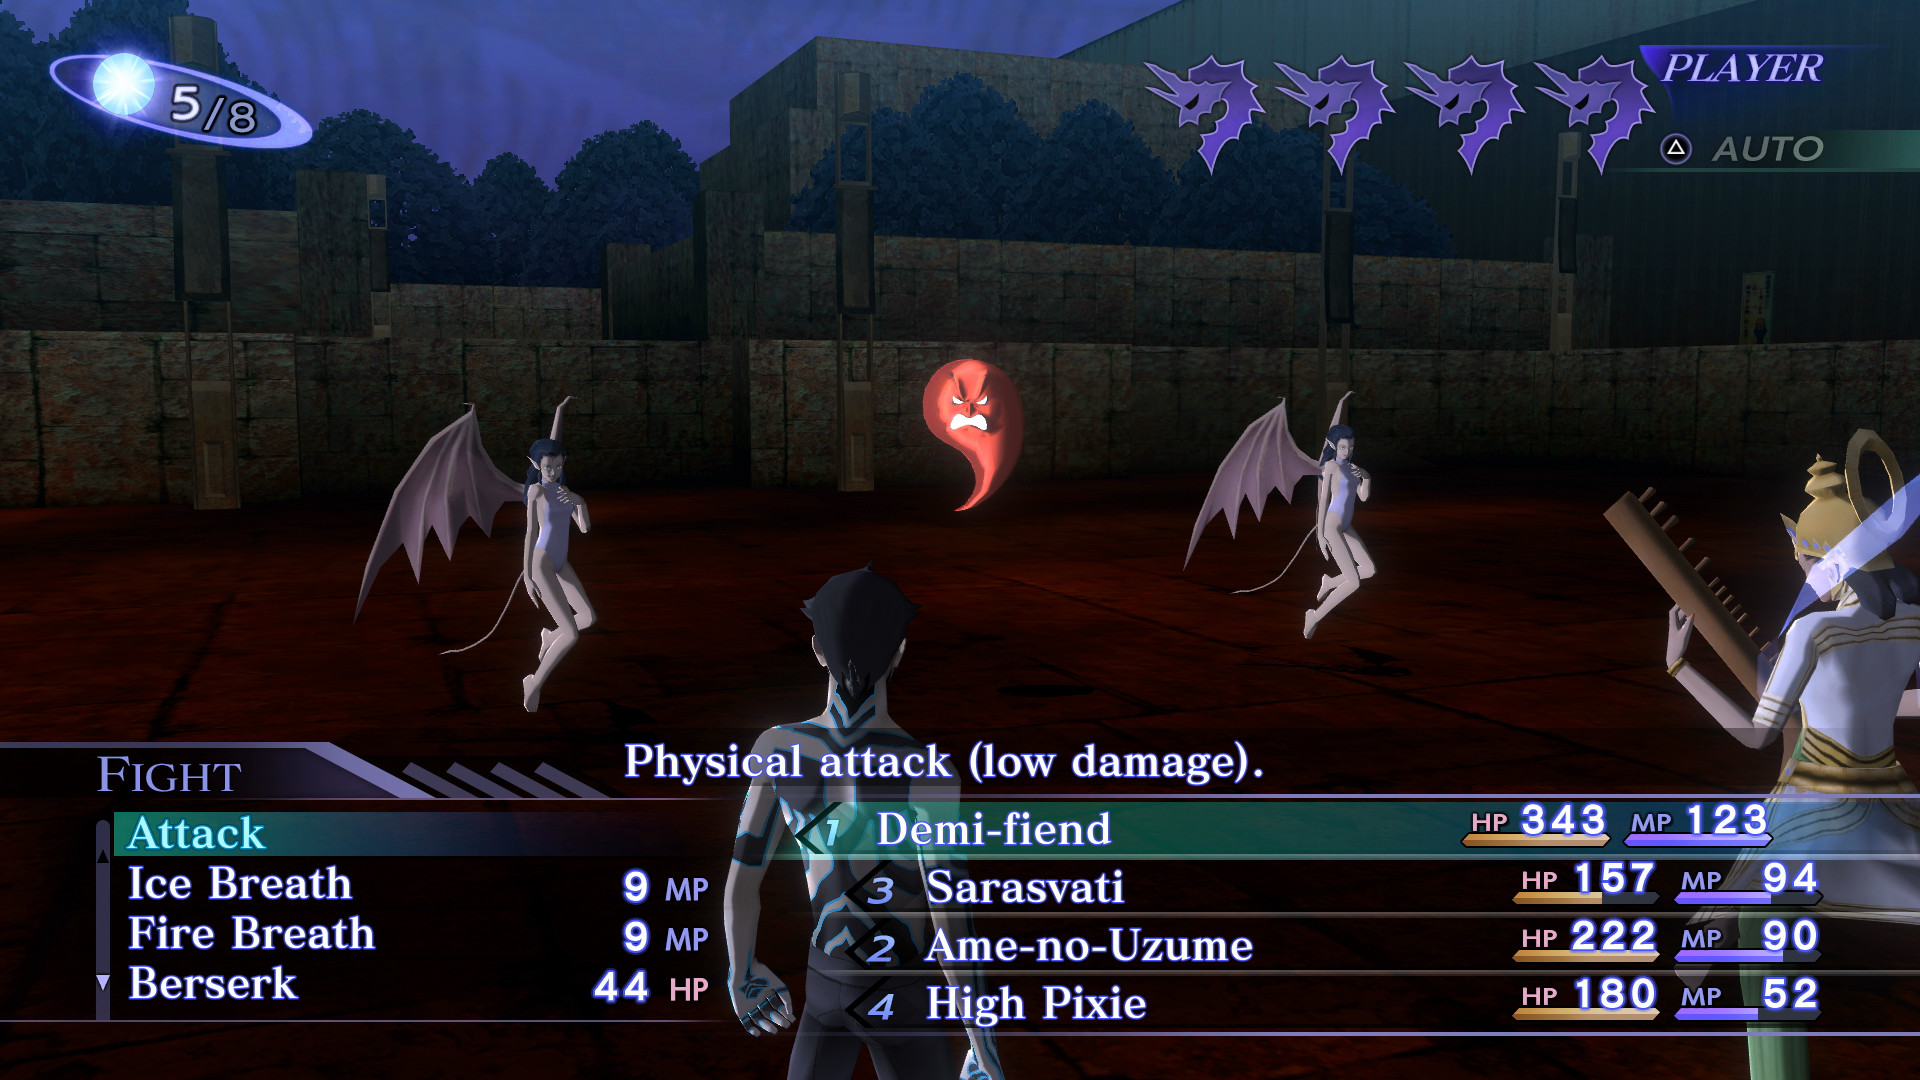 Shin Megami Tensei III Nocturne HD Remaster - Mercy and Expectation Map Pack Featured Screenshot #1